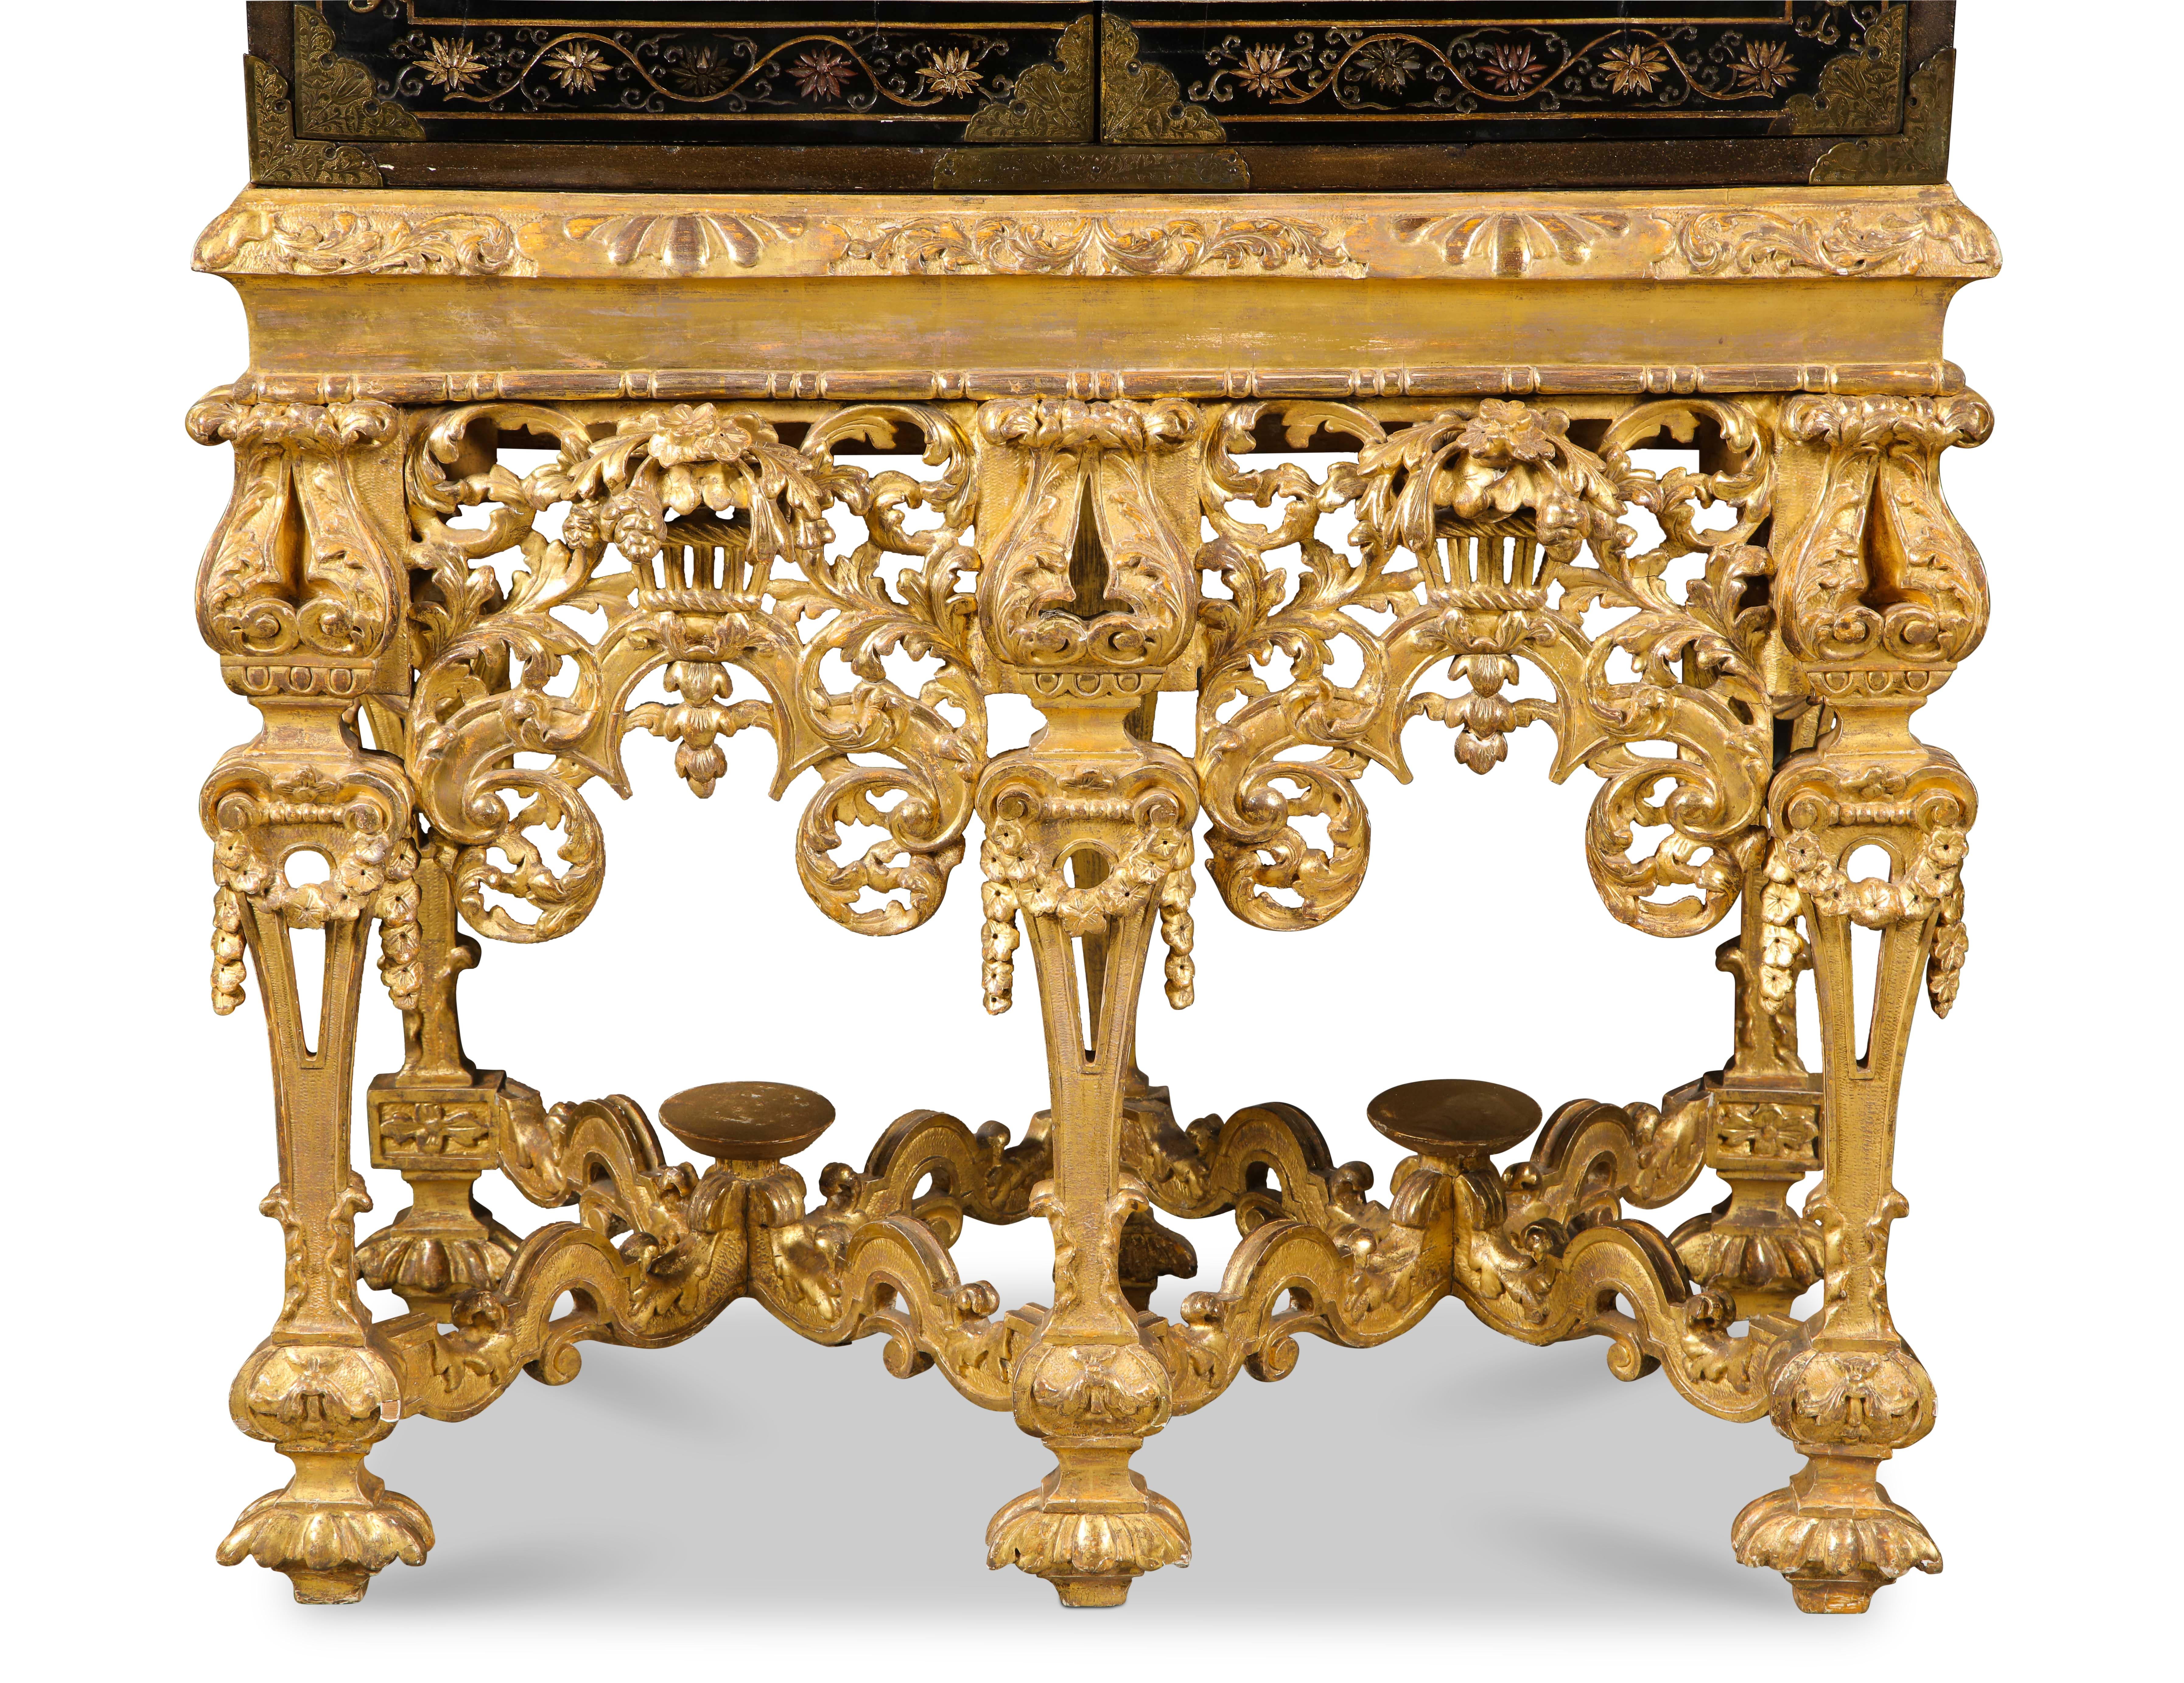 English Chinese Brass-Mounted Coromandel Lacquer Cabinet on a Charles II, circa 1685